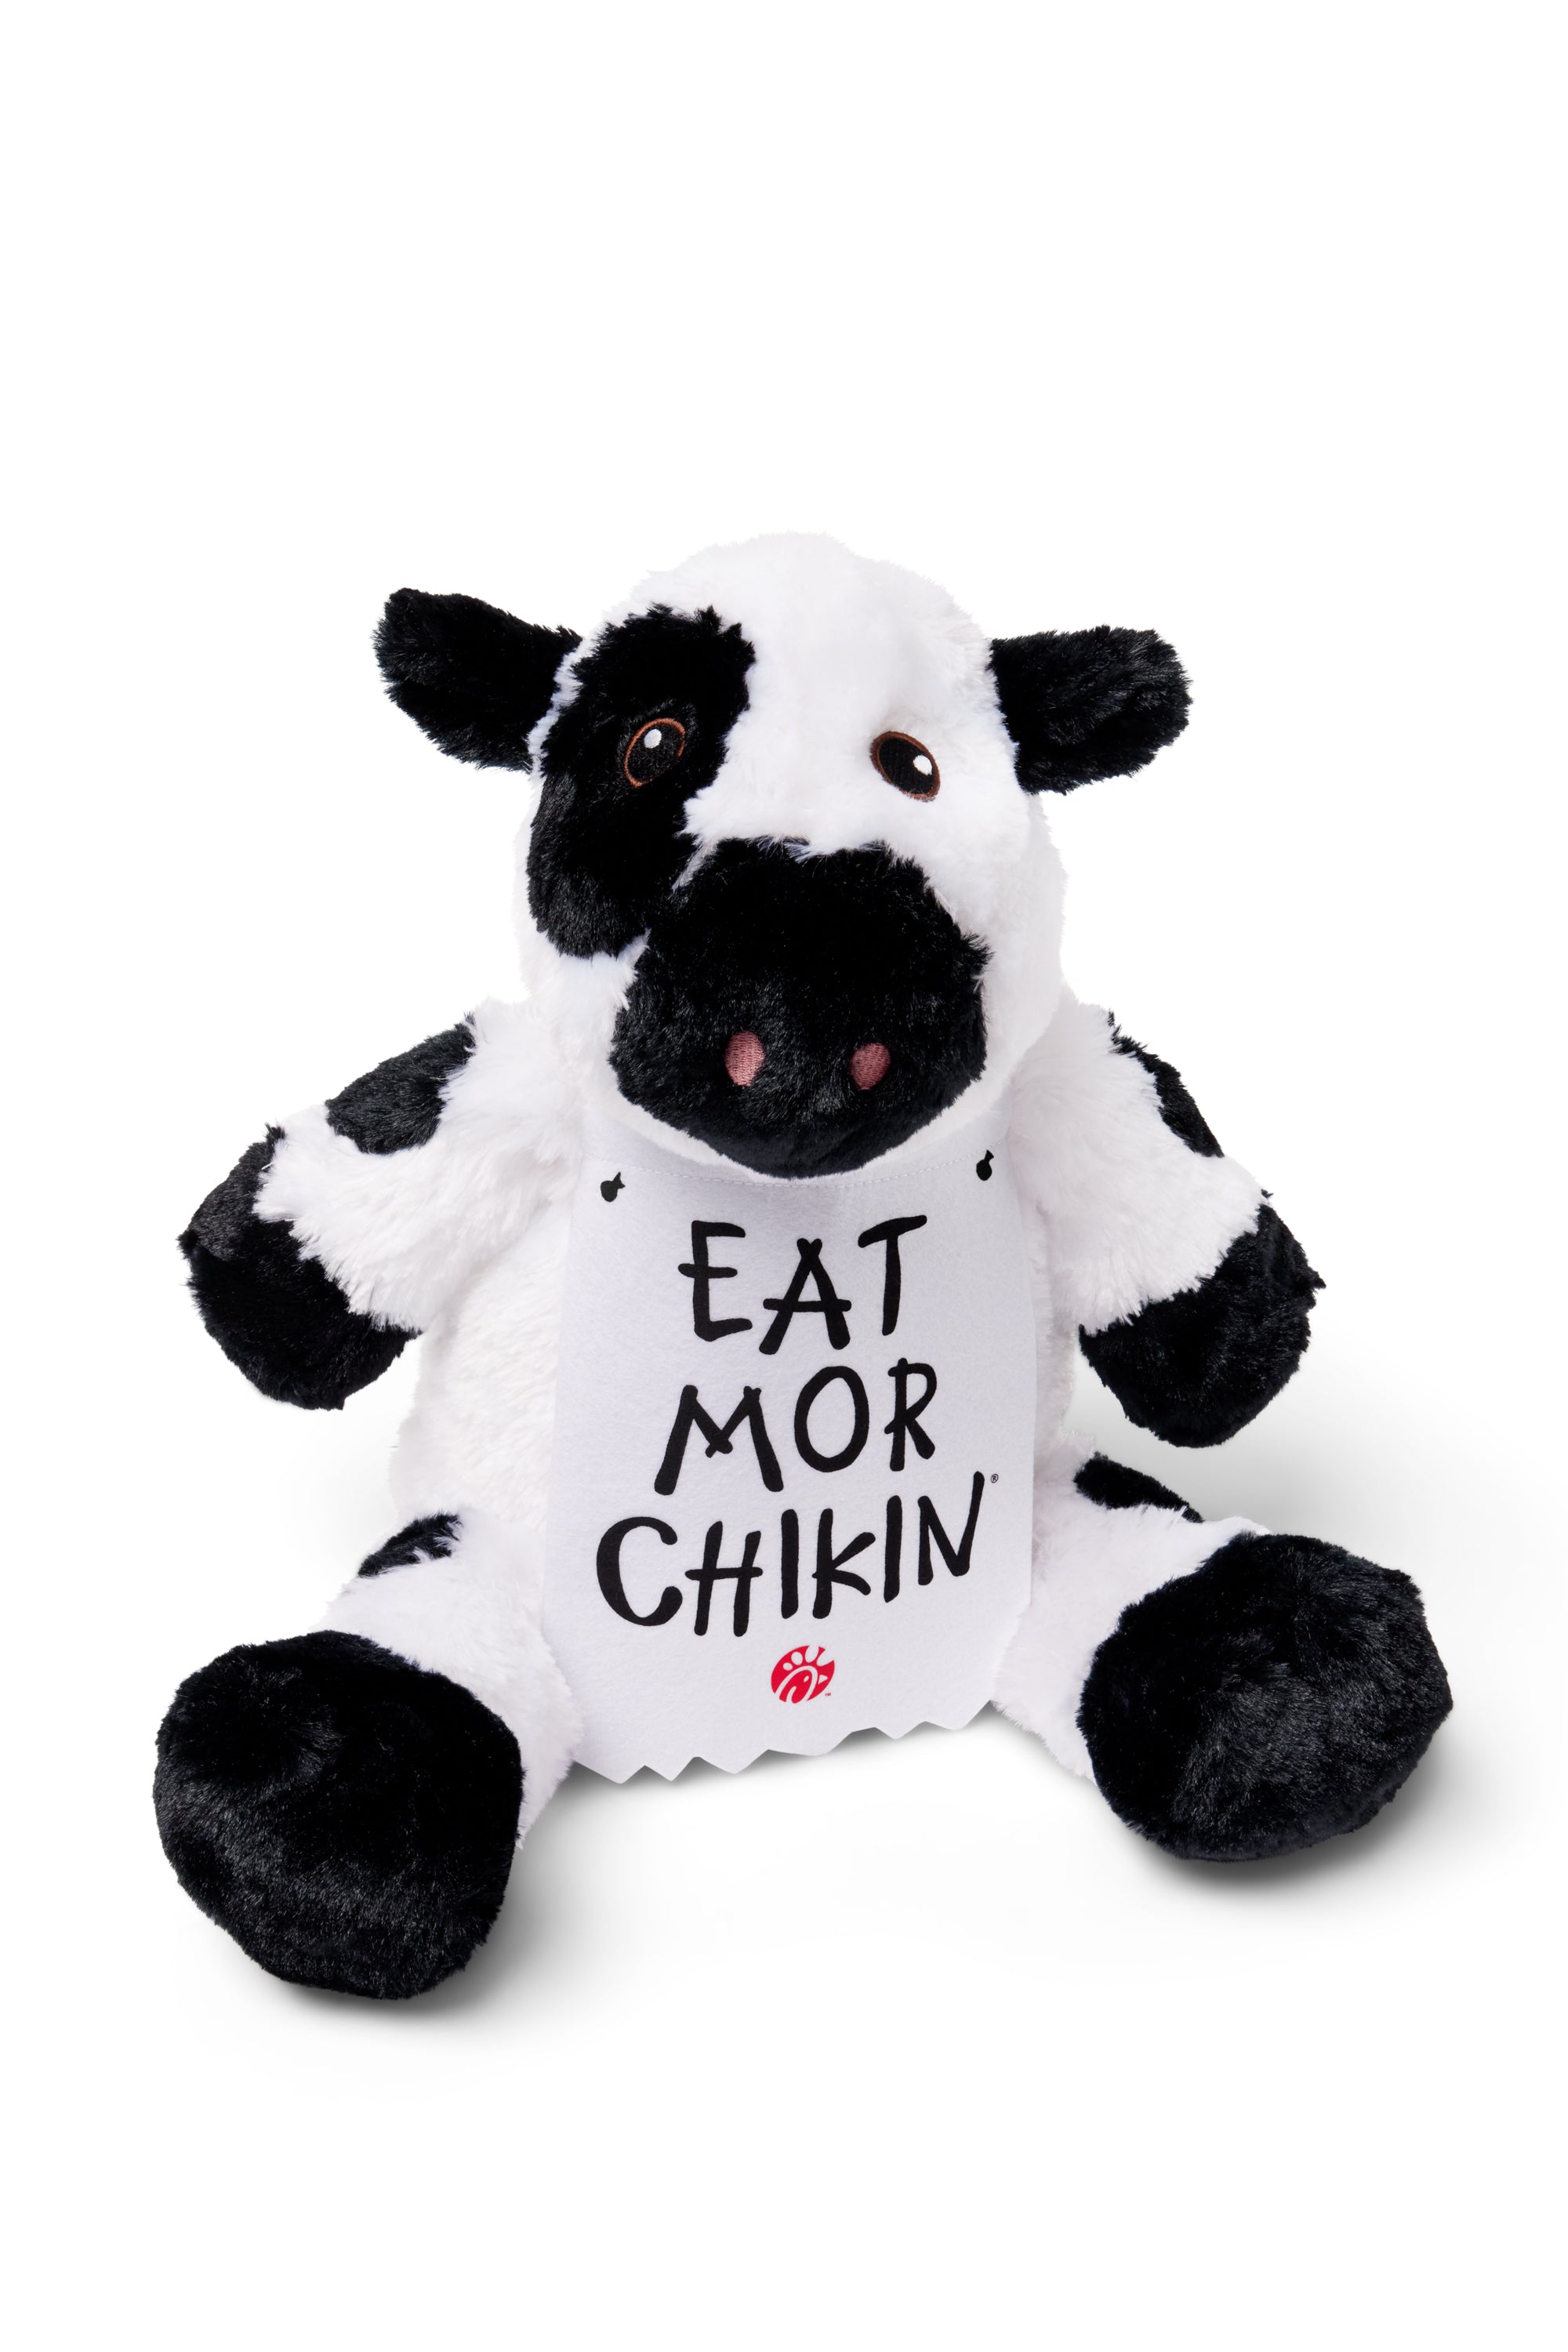 Sitting Cuddly Plush Cow wearing sign that says "EAT MOR CHIKIN"